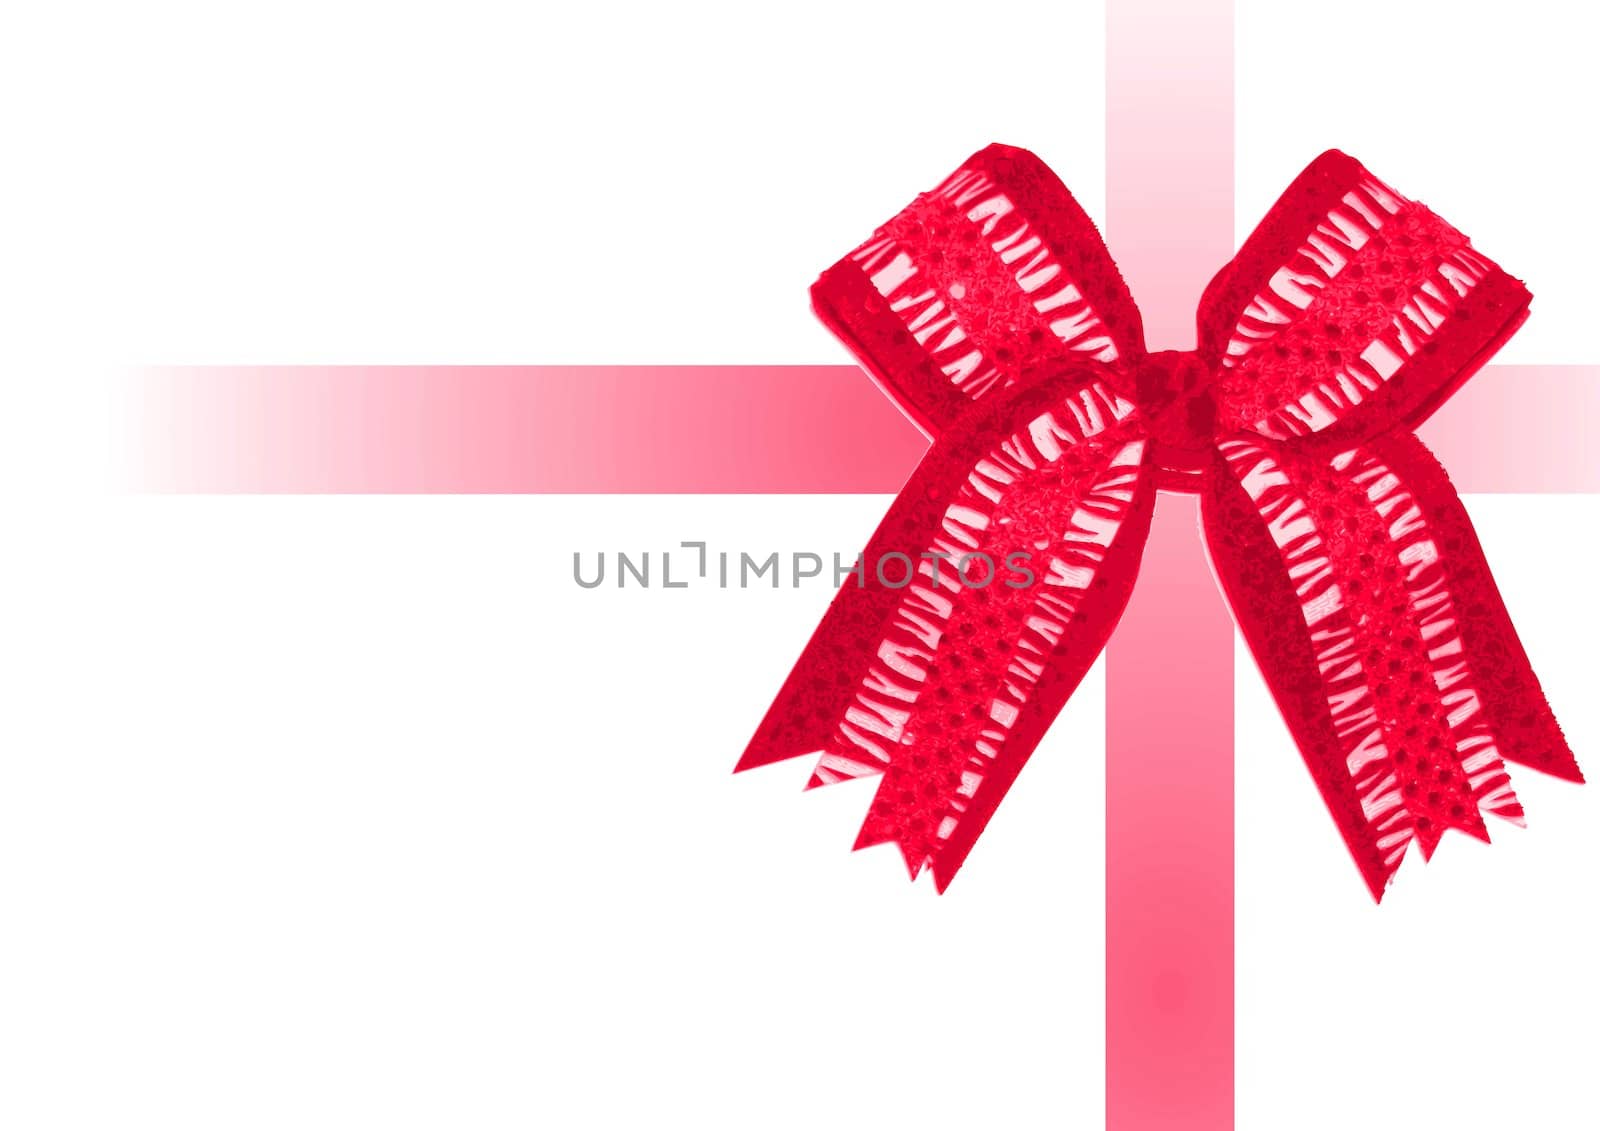 A red bow and ribbons wrapping the image as if it were a gift.